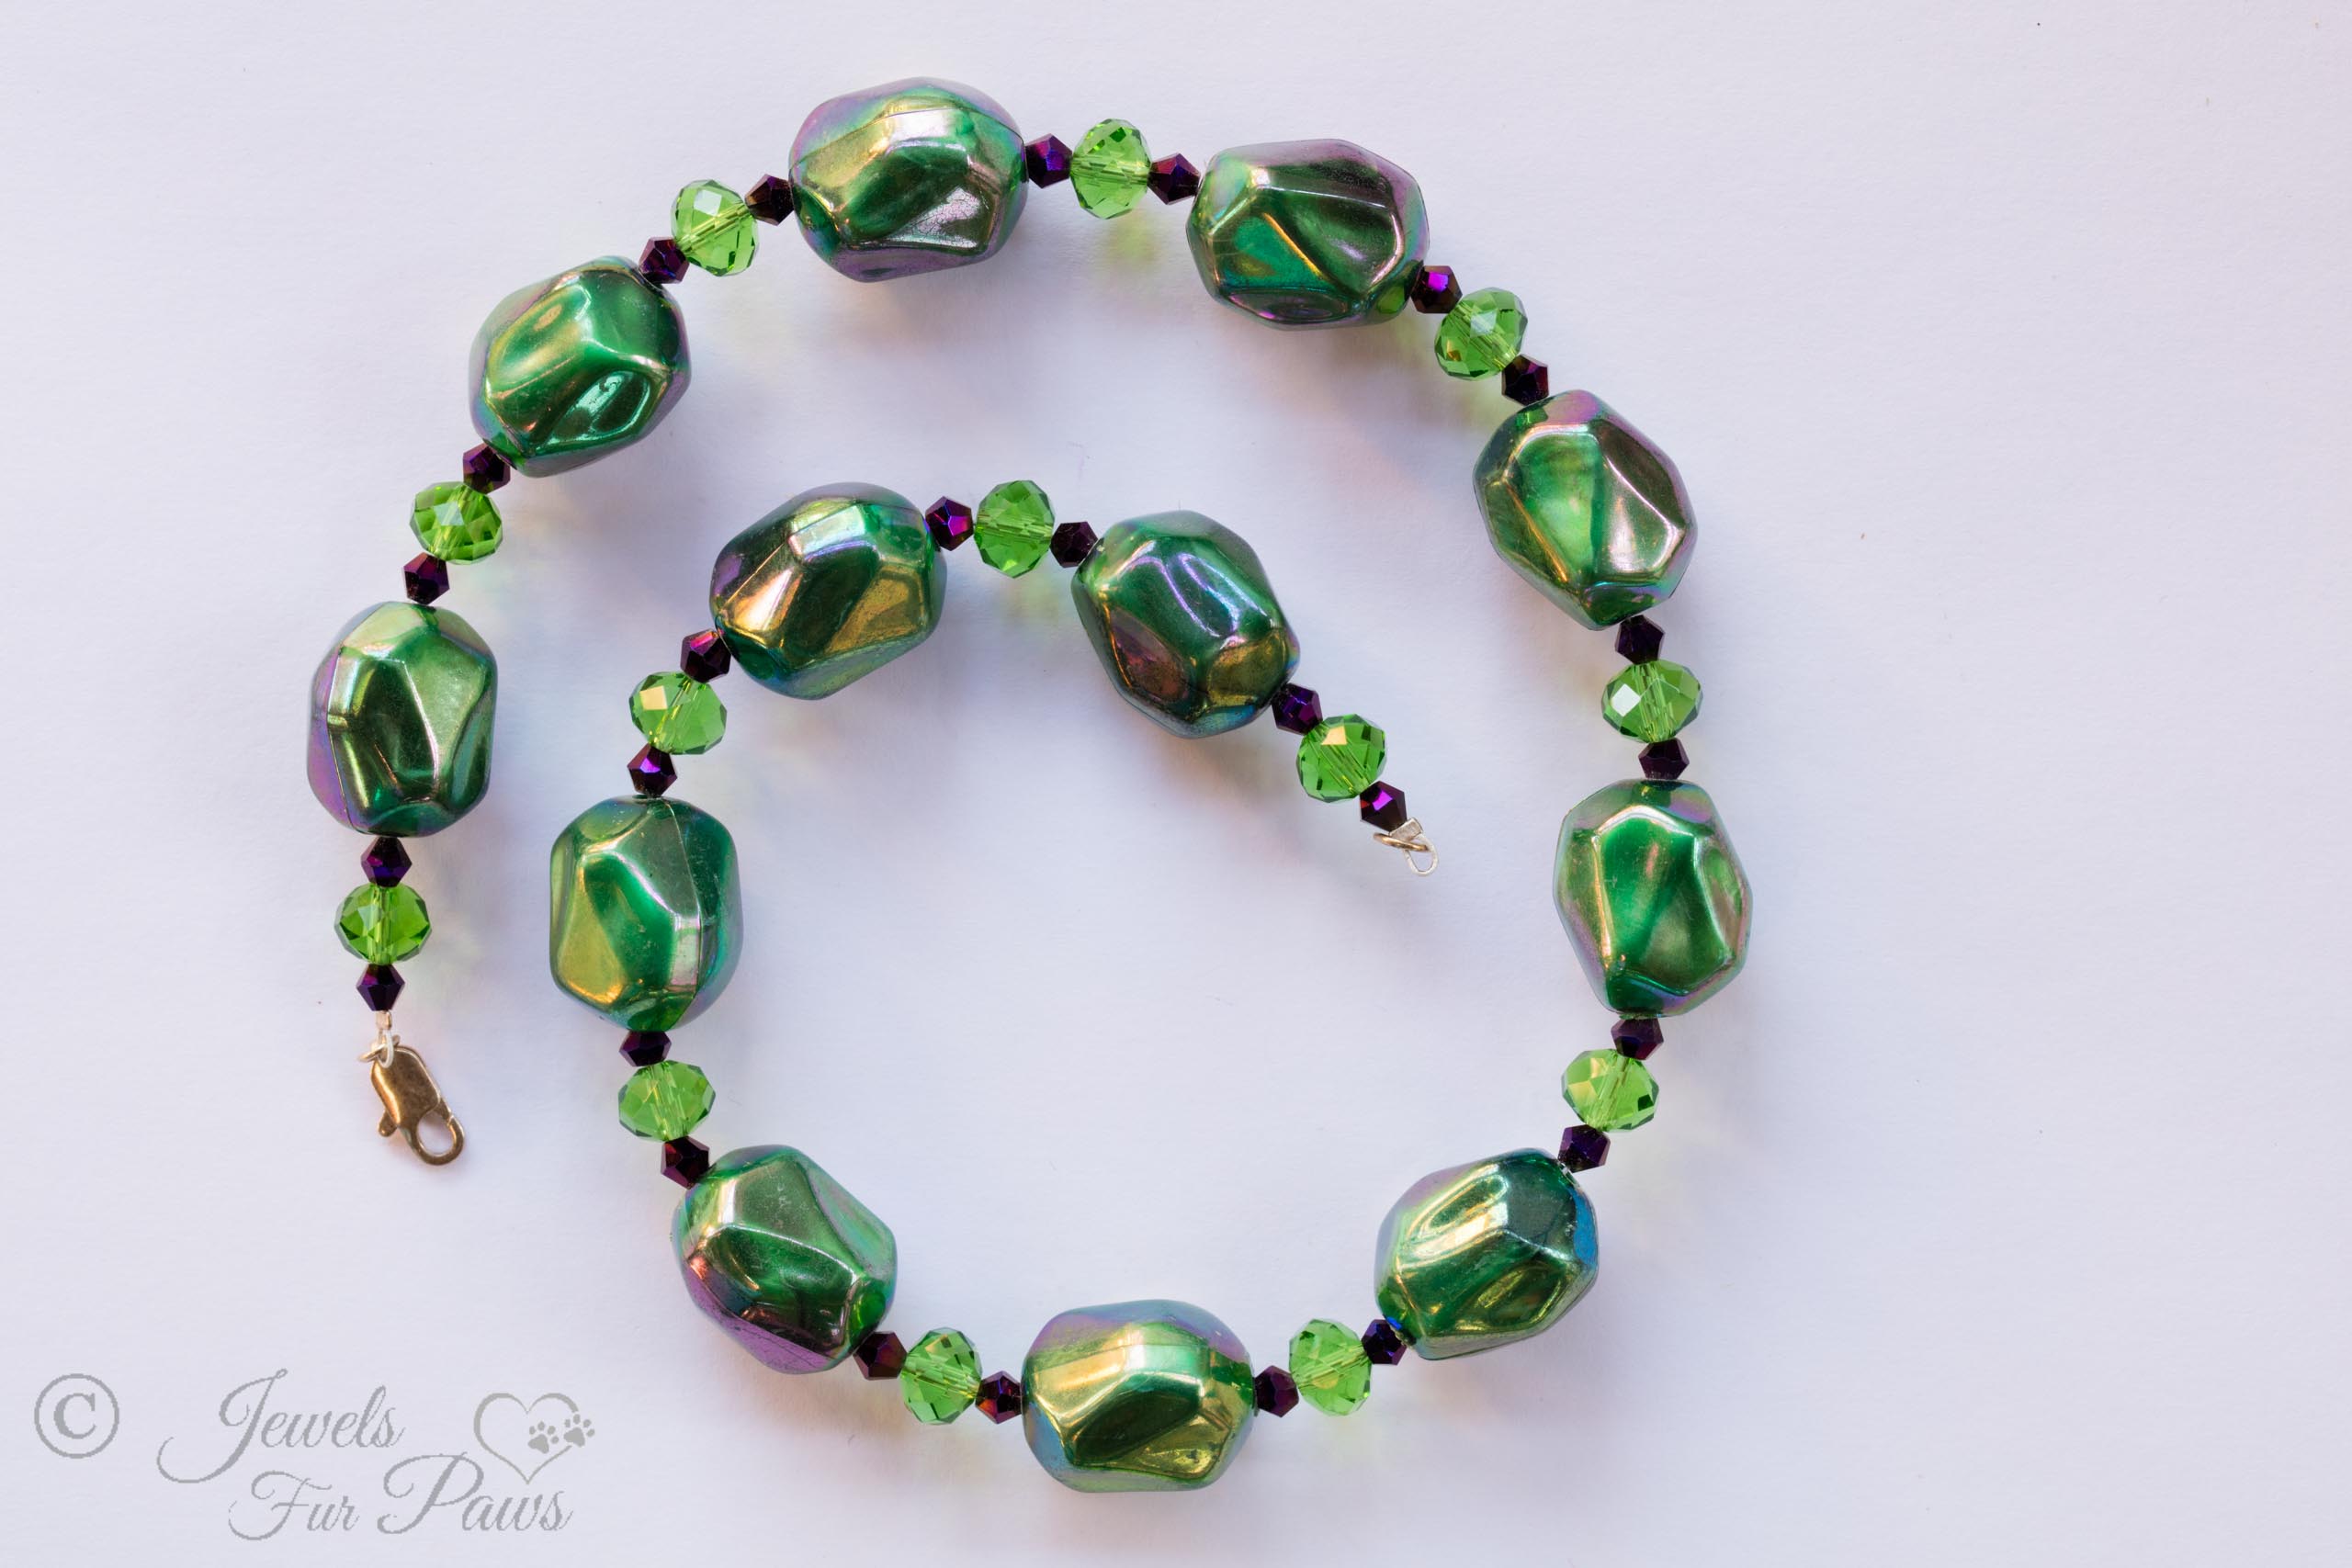 Green Bauble Beads with Green Swarovski Crystal Spacers